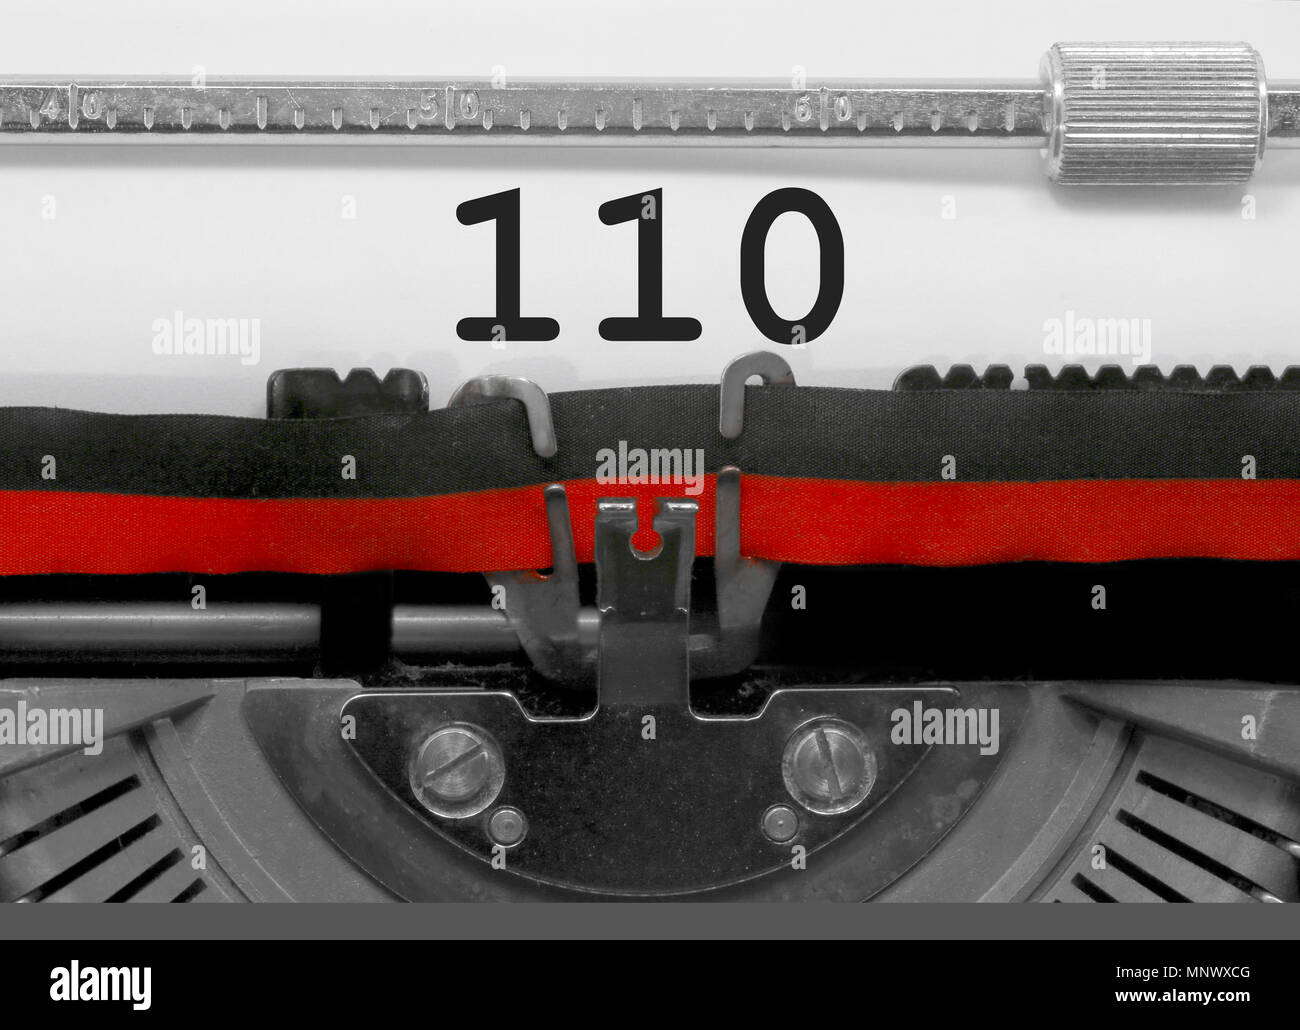 110 Number text written by an old typewriter on white sheet Stock Photo